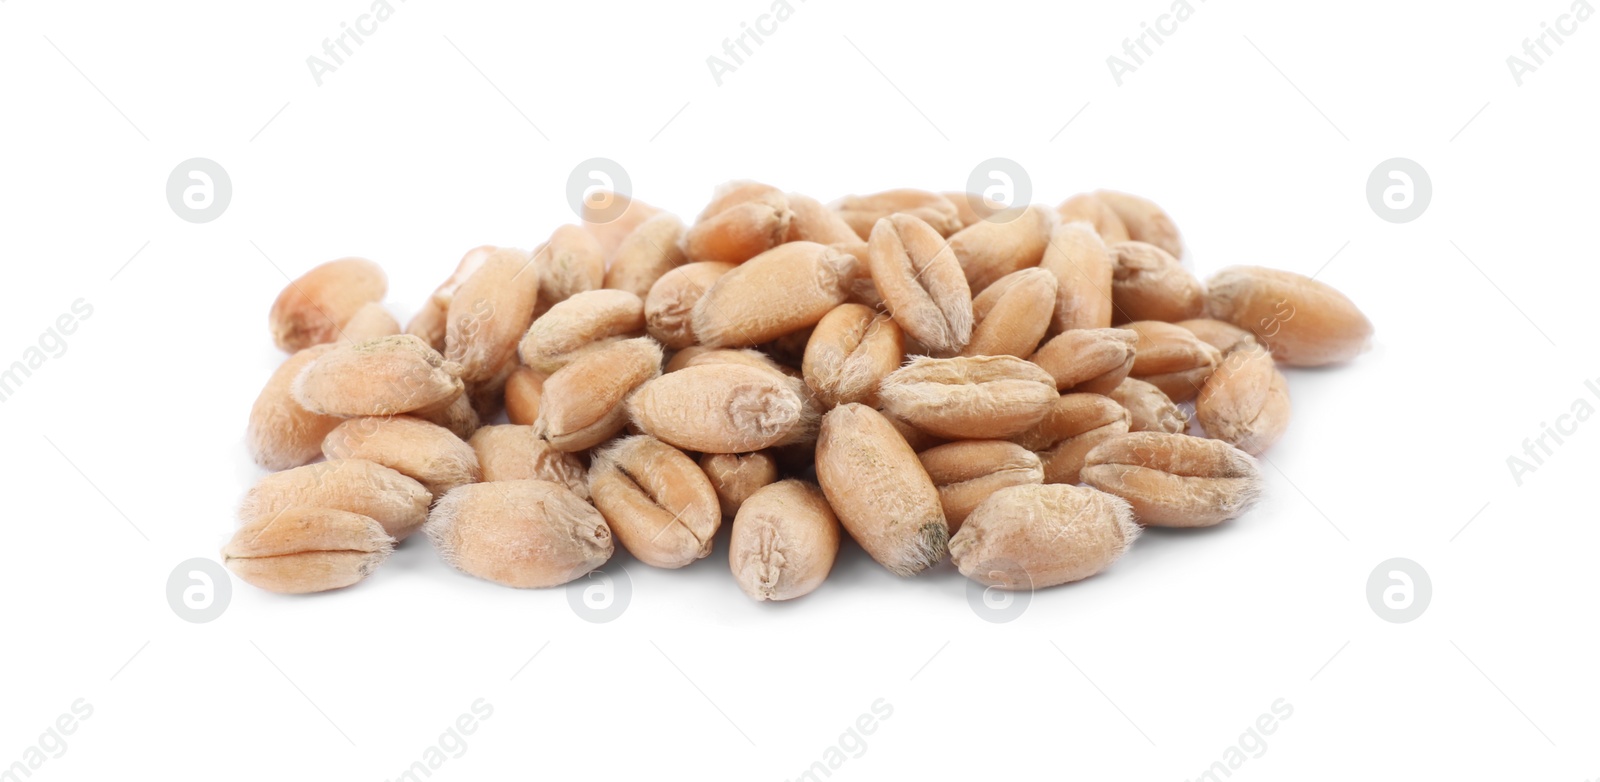 Photo of Pile of wheat grains isolated on white